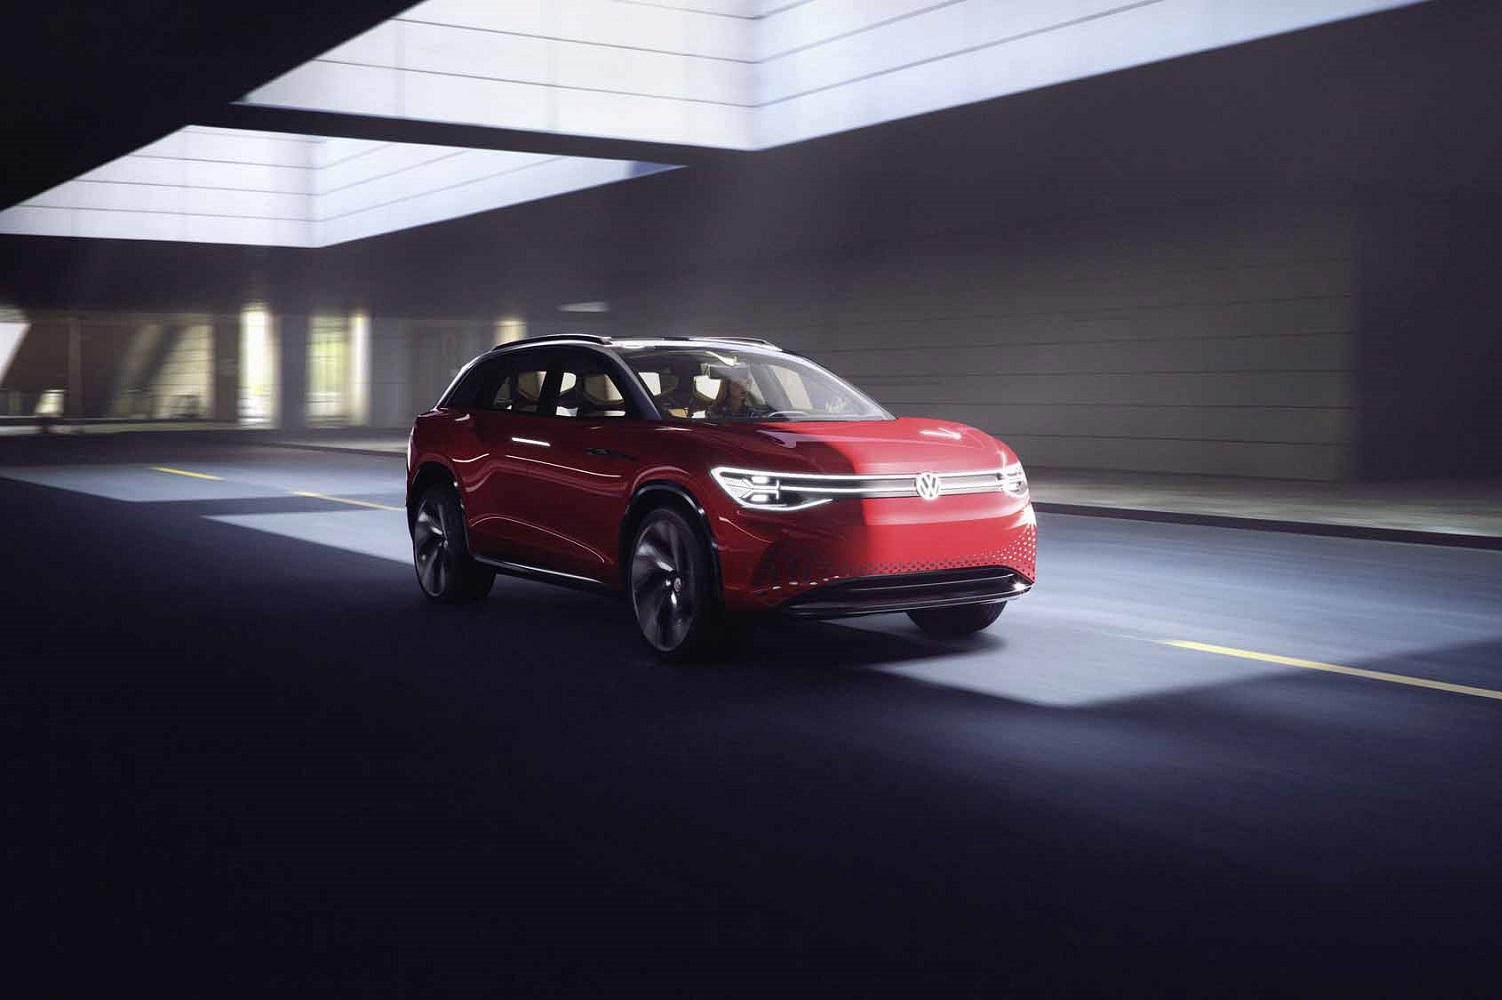 volkswagen id roomzz previews production suv coming in 2021 vw concept 2